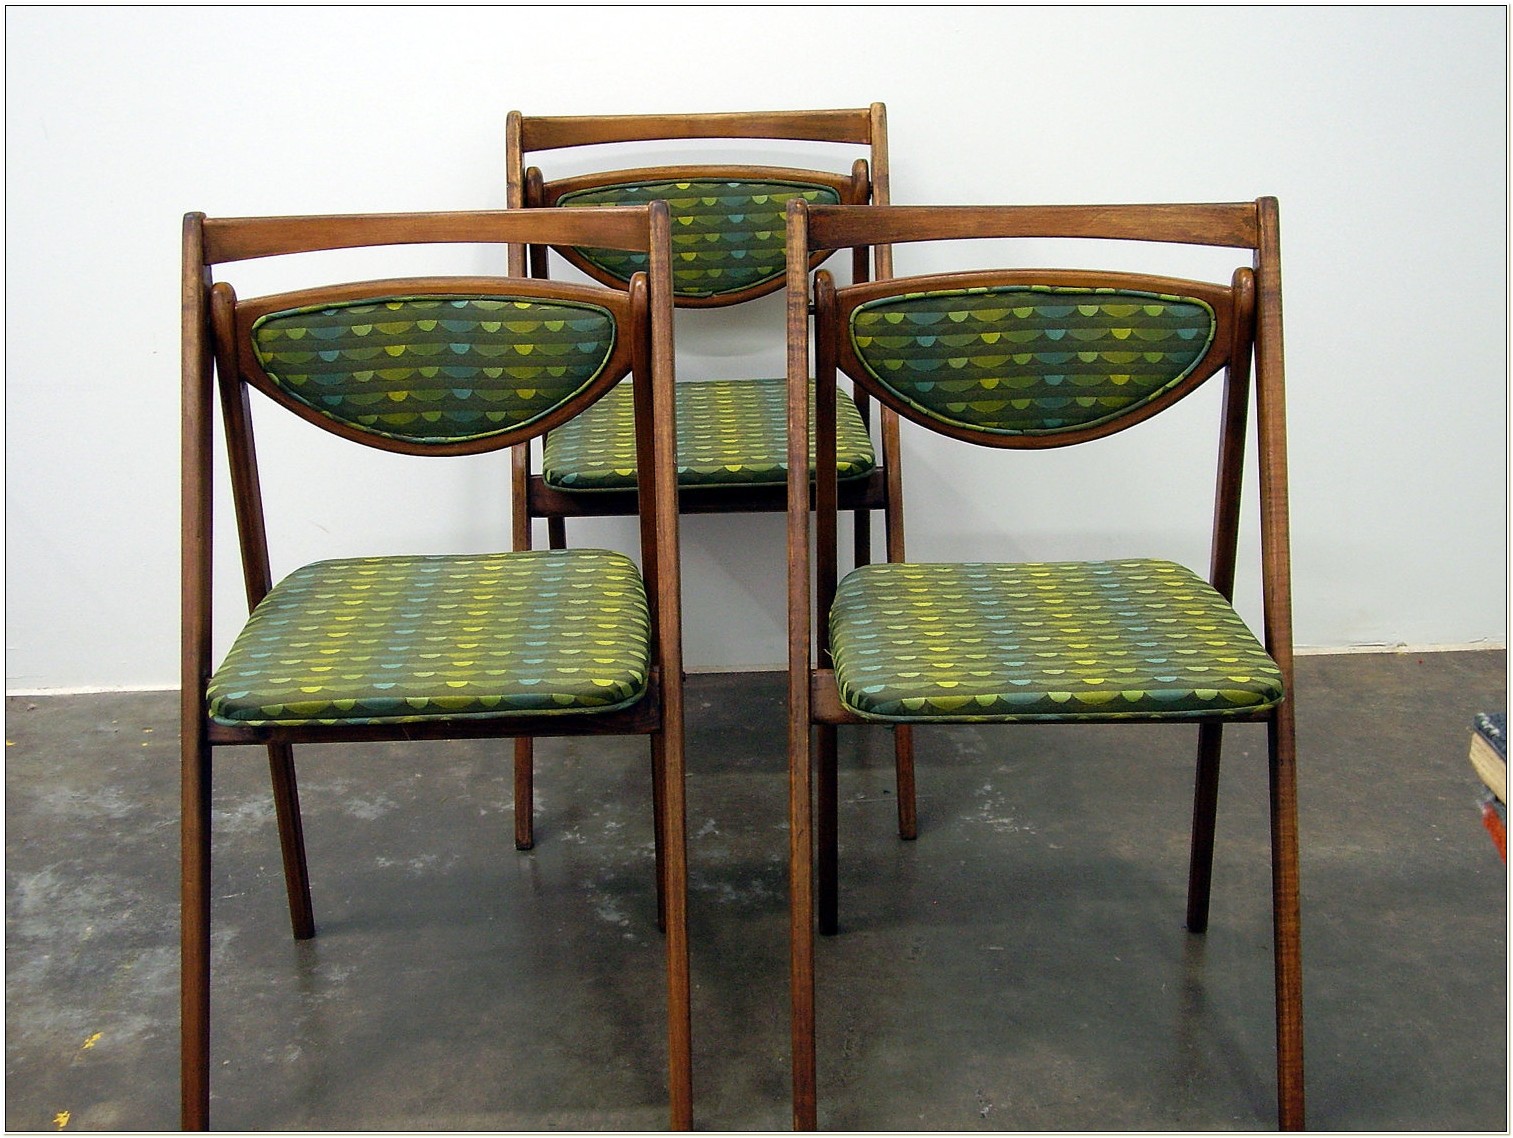 Stakmore Folding Chairs Antique - Chairs : Home Decorating Ideas #